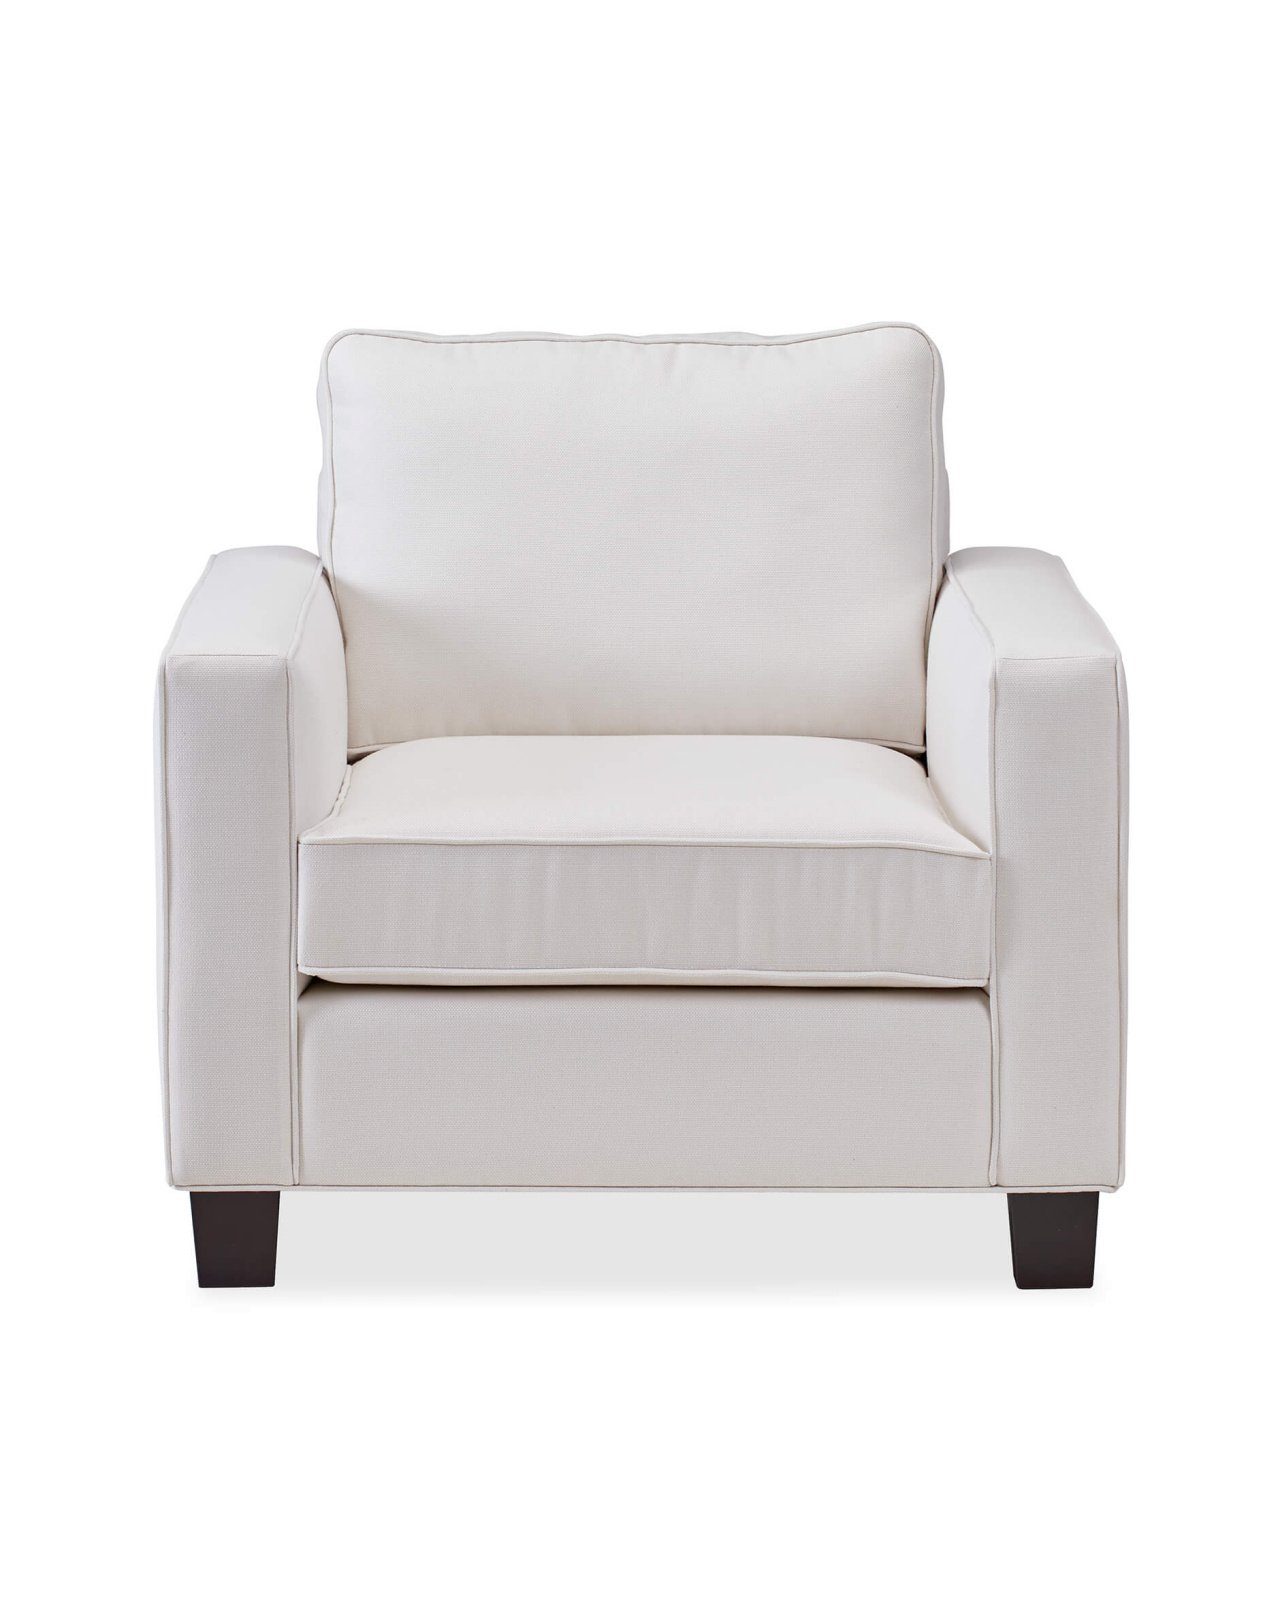 Plaza fauteuil off-white